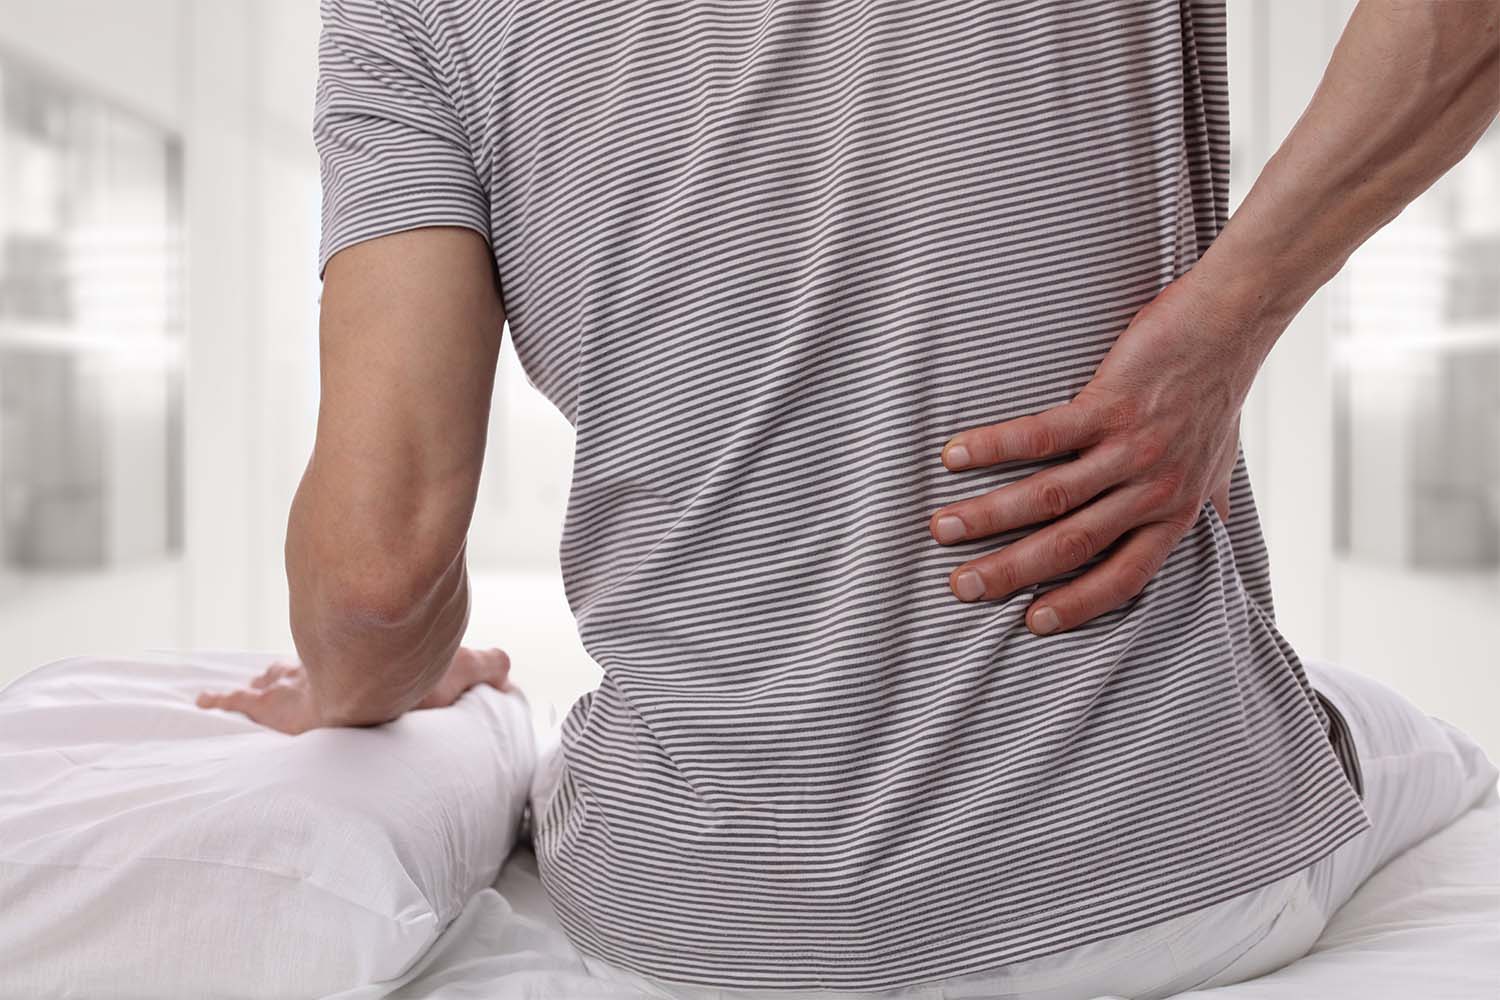 VA Secondary Conditions to Back Pain & How To Appeal